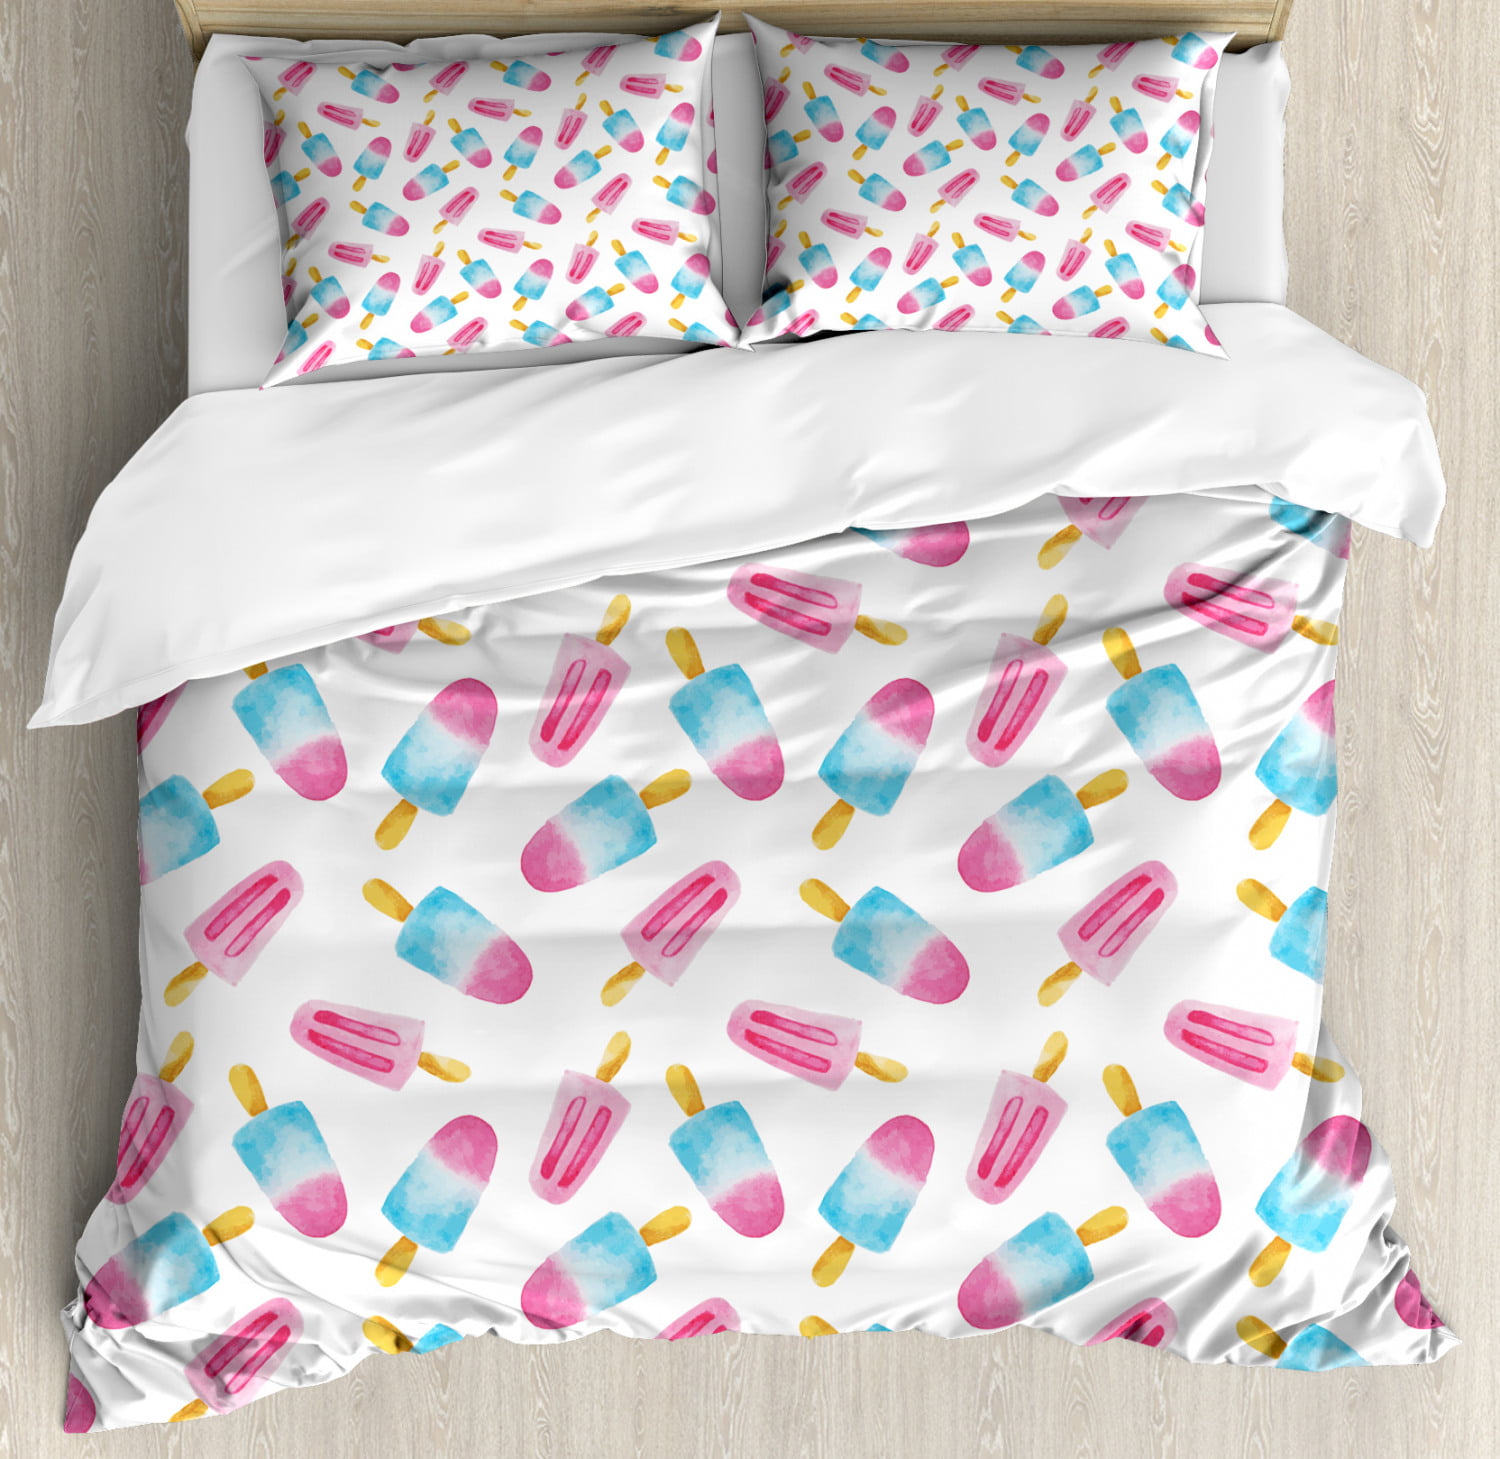 Ice Cream King Size Duvet Cover Set Pattern With Refreshing